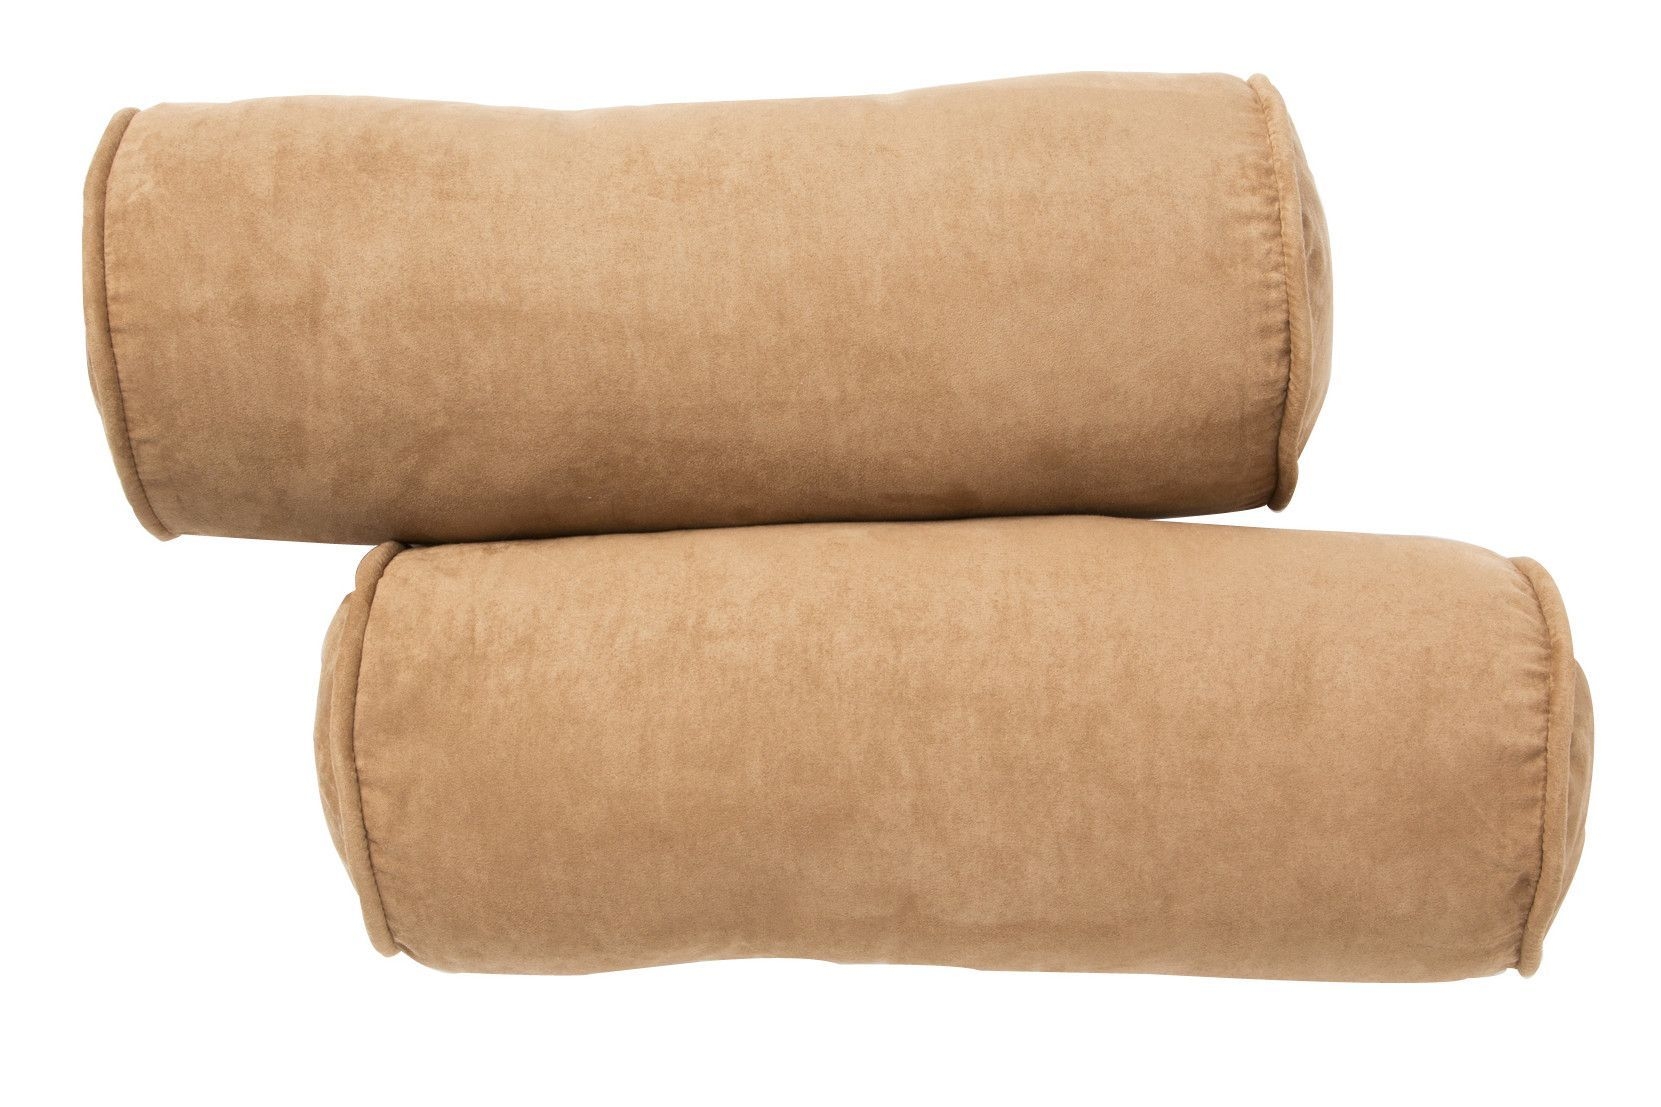 Microsuede Bolster Pillow (Set of 2)